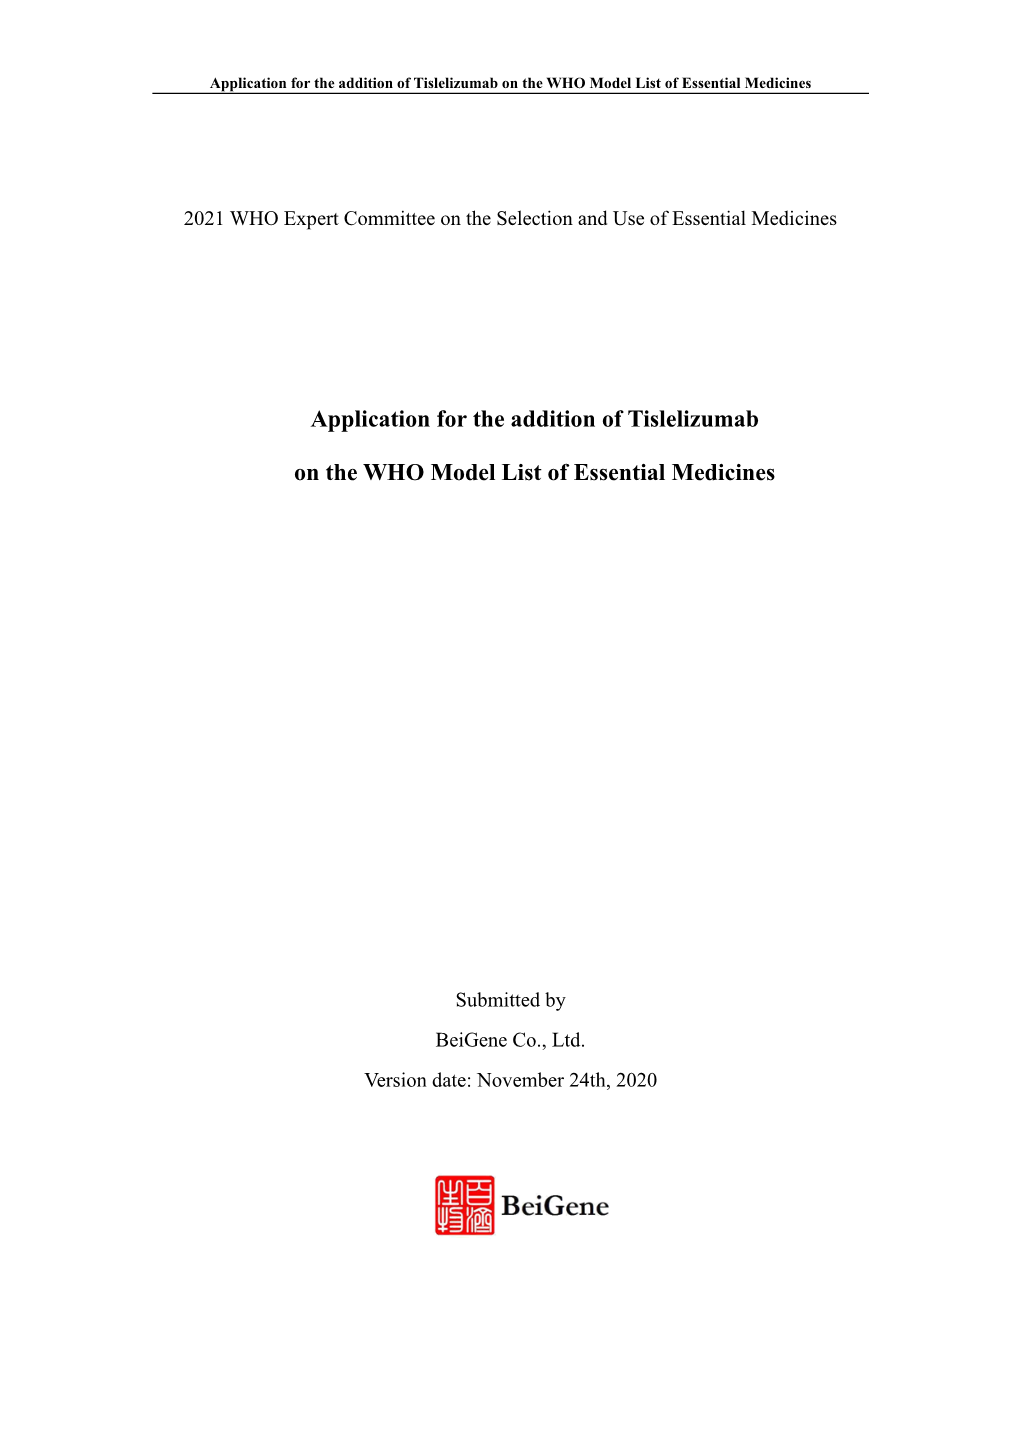 Application for the Addition of Tislelizumab on the WHO Model List of Essential Medicines